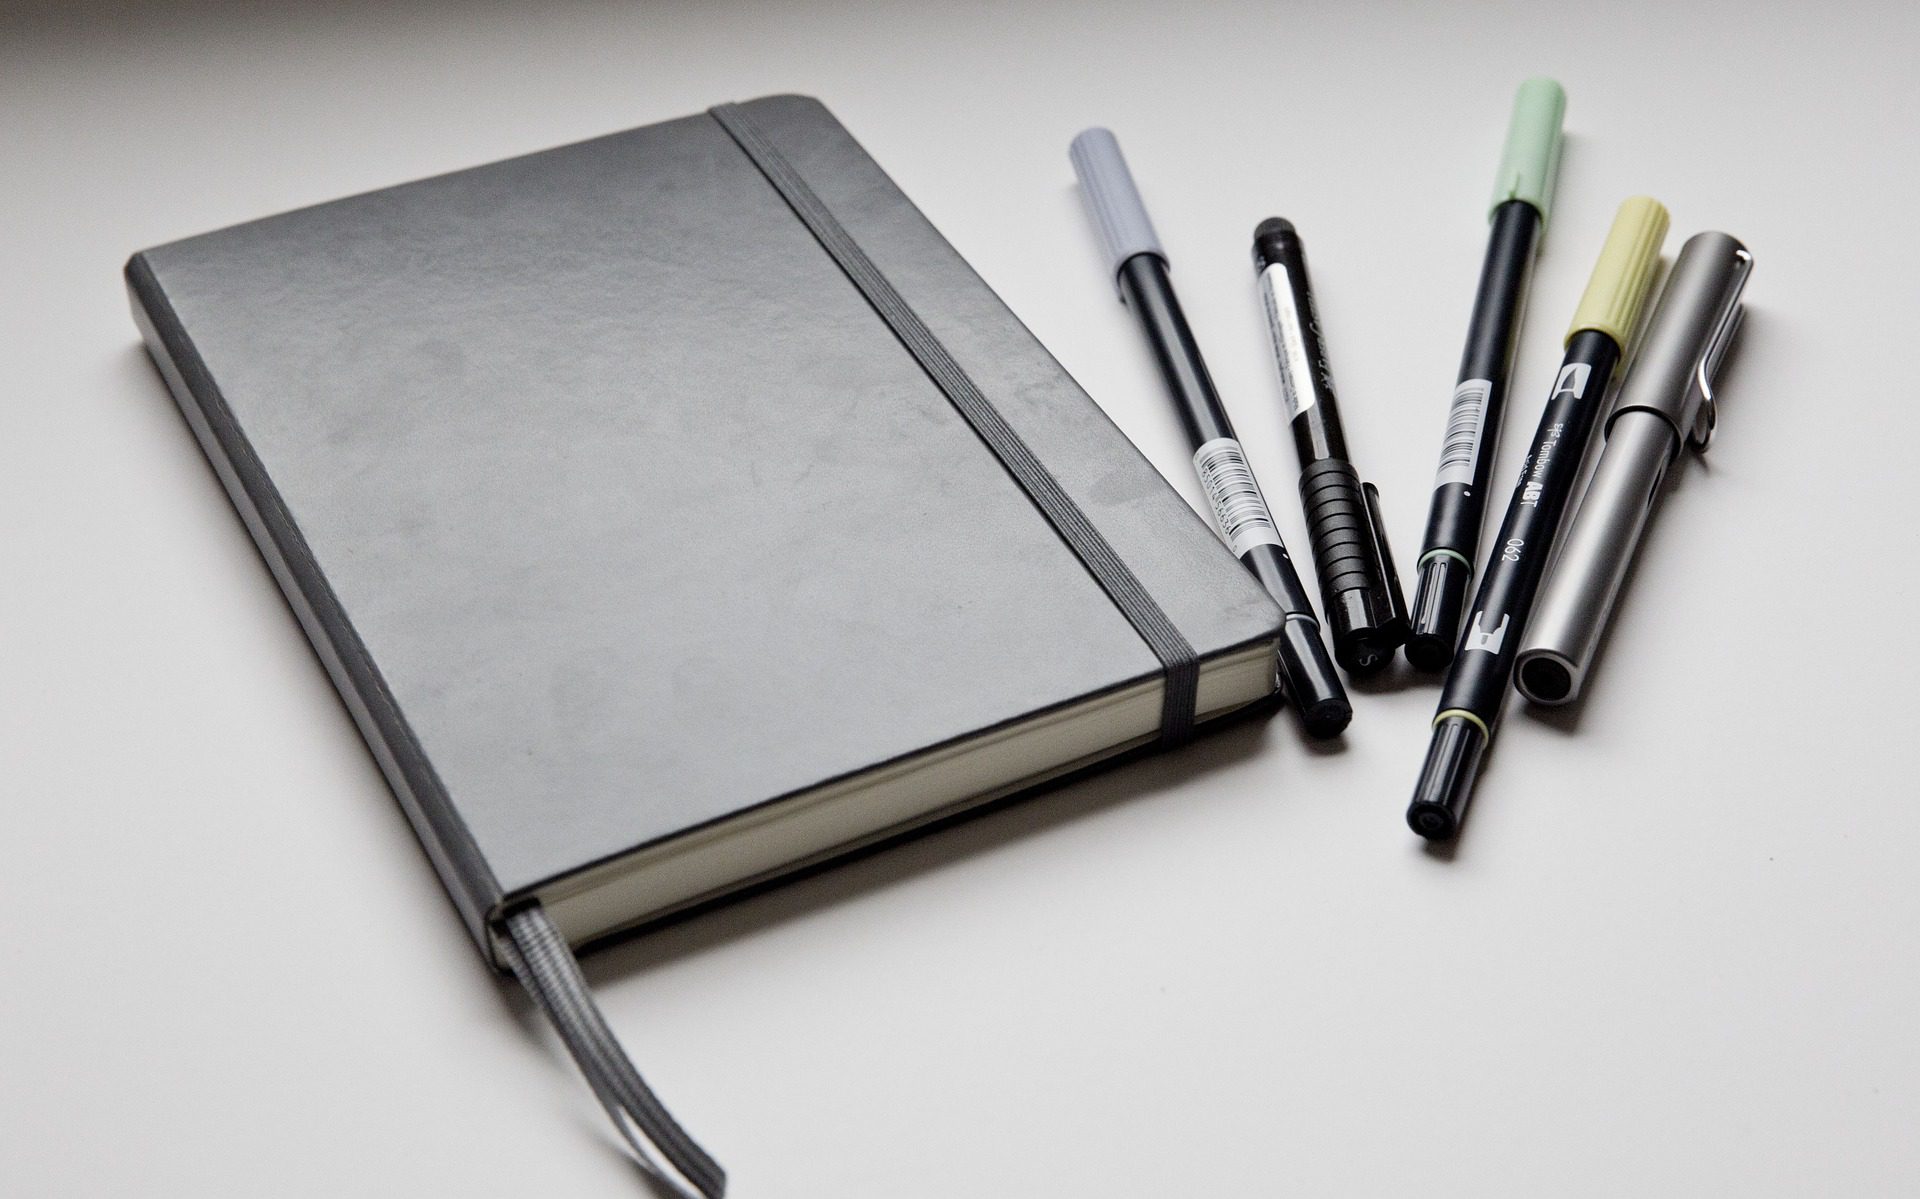 A notebook and some pens on top of the table.